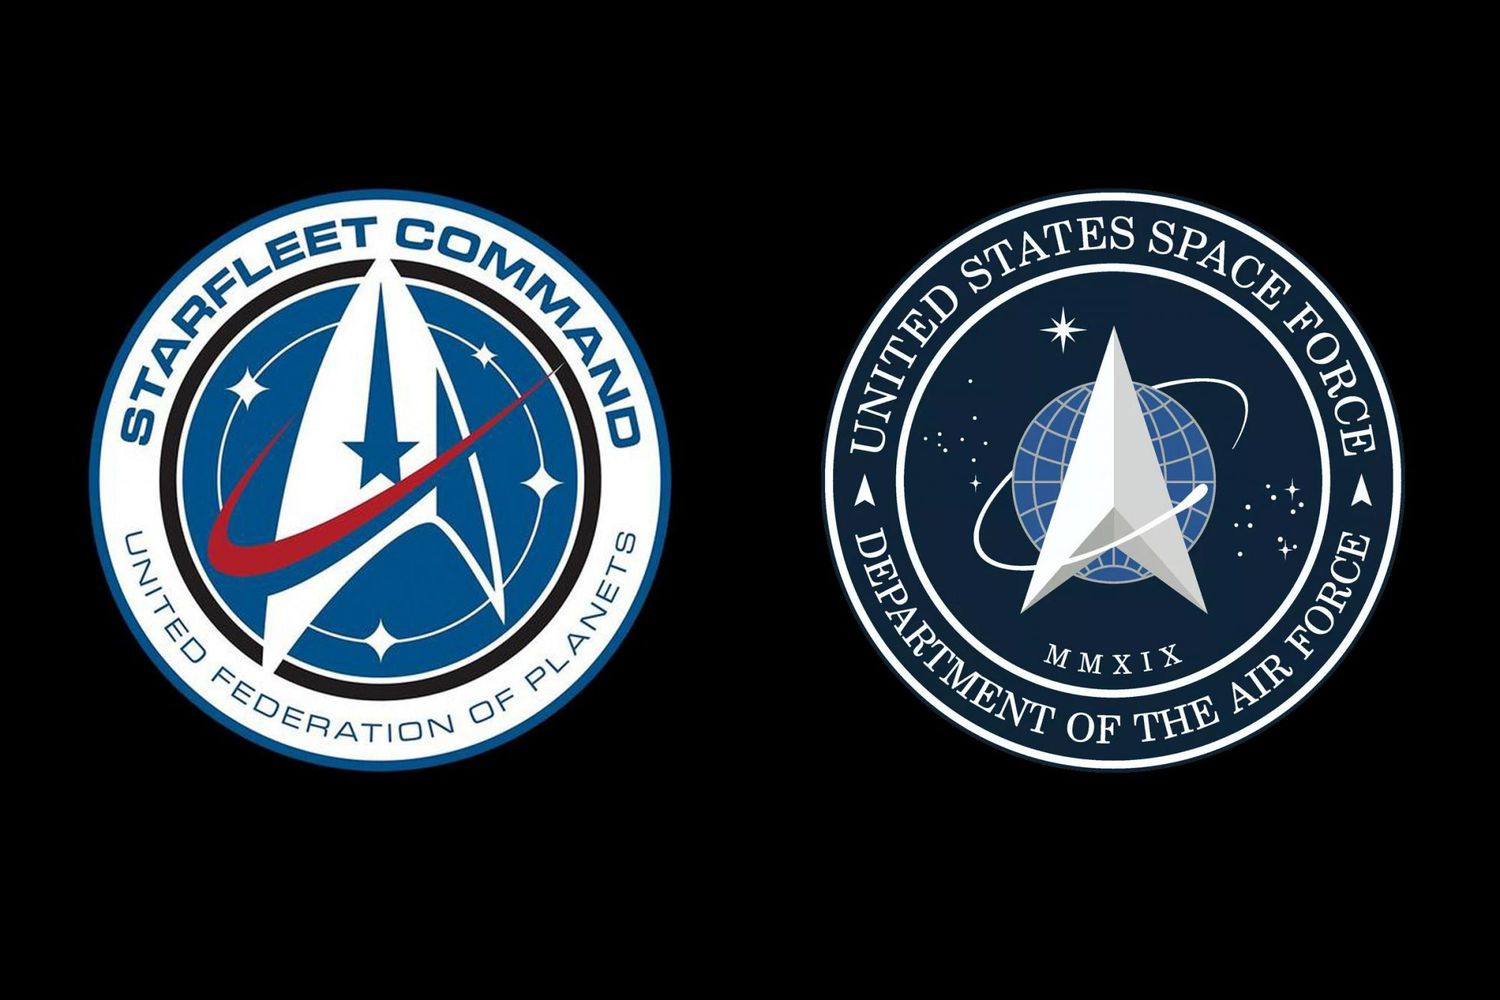 George Takei internet respond to Space Force logos resemblance